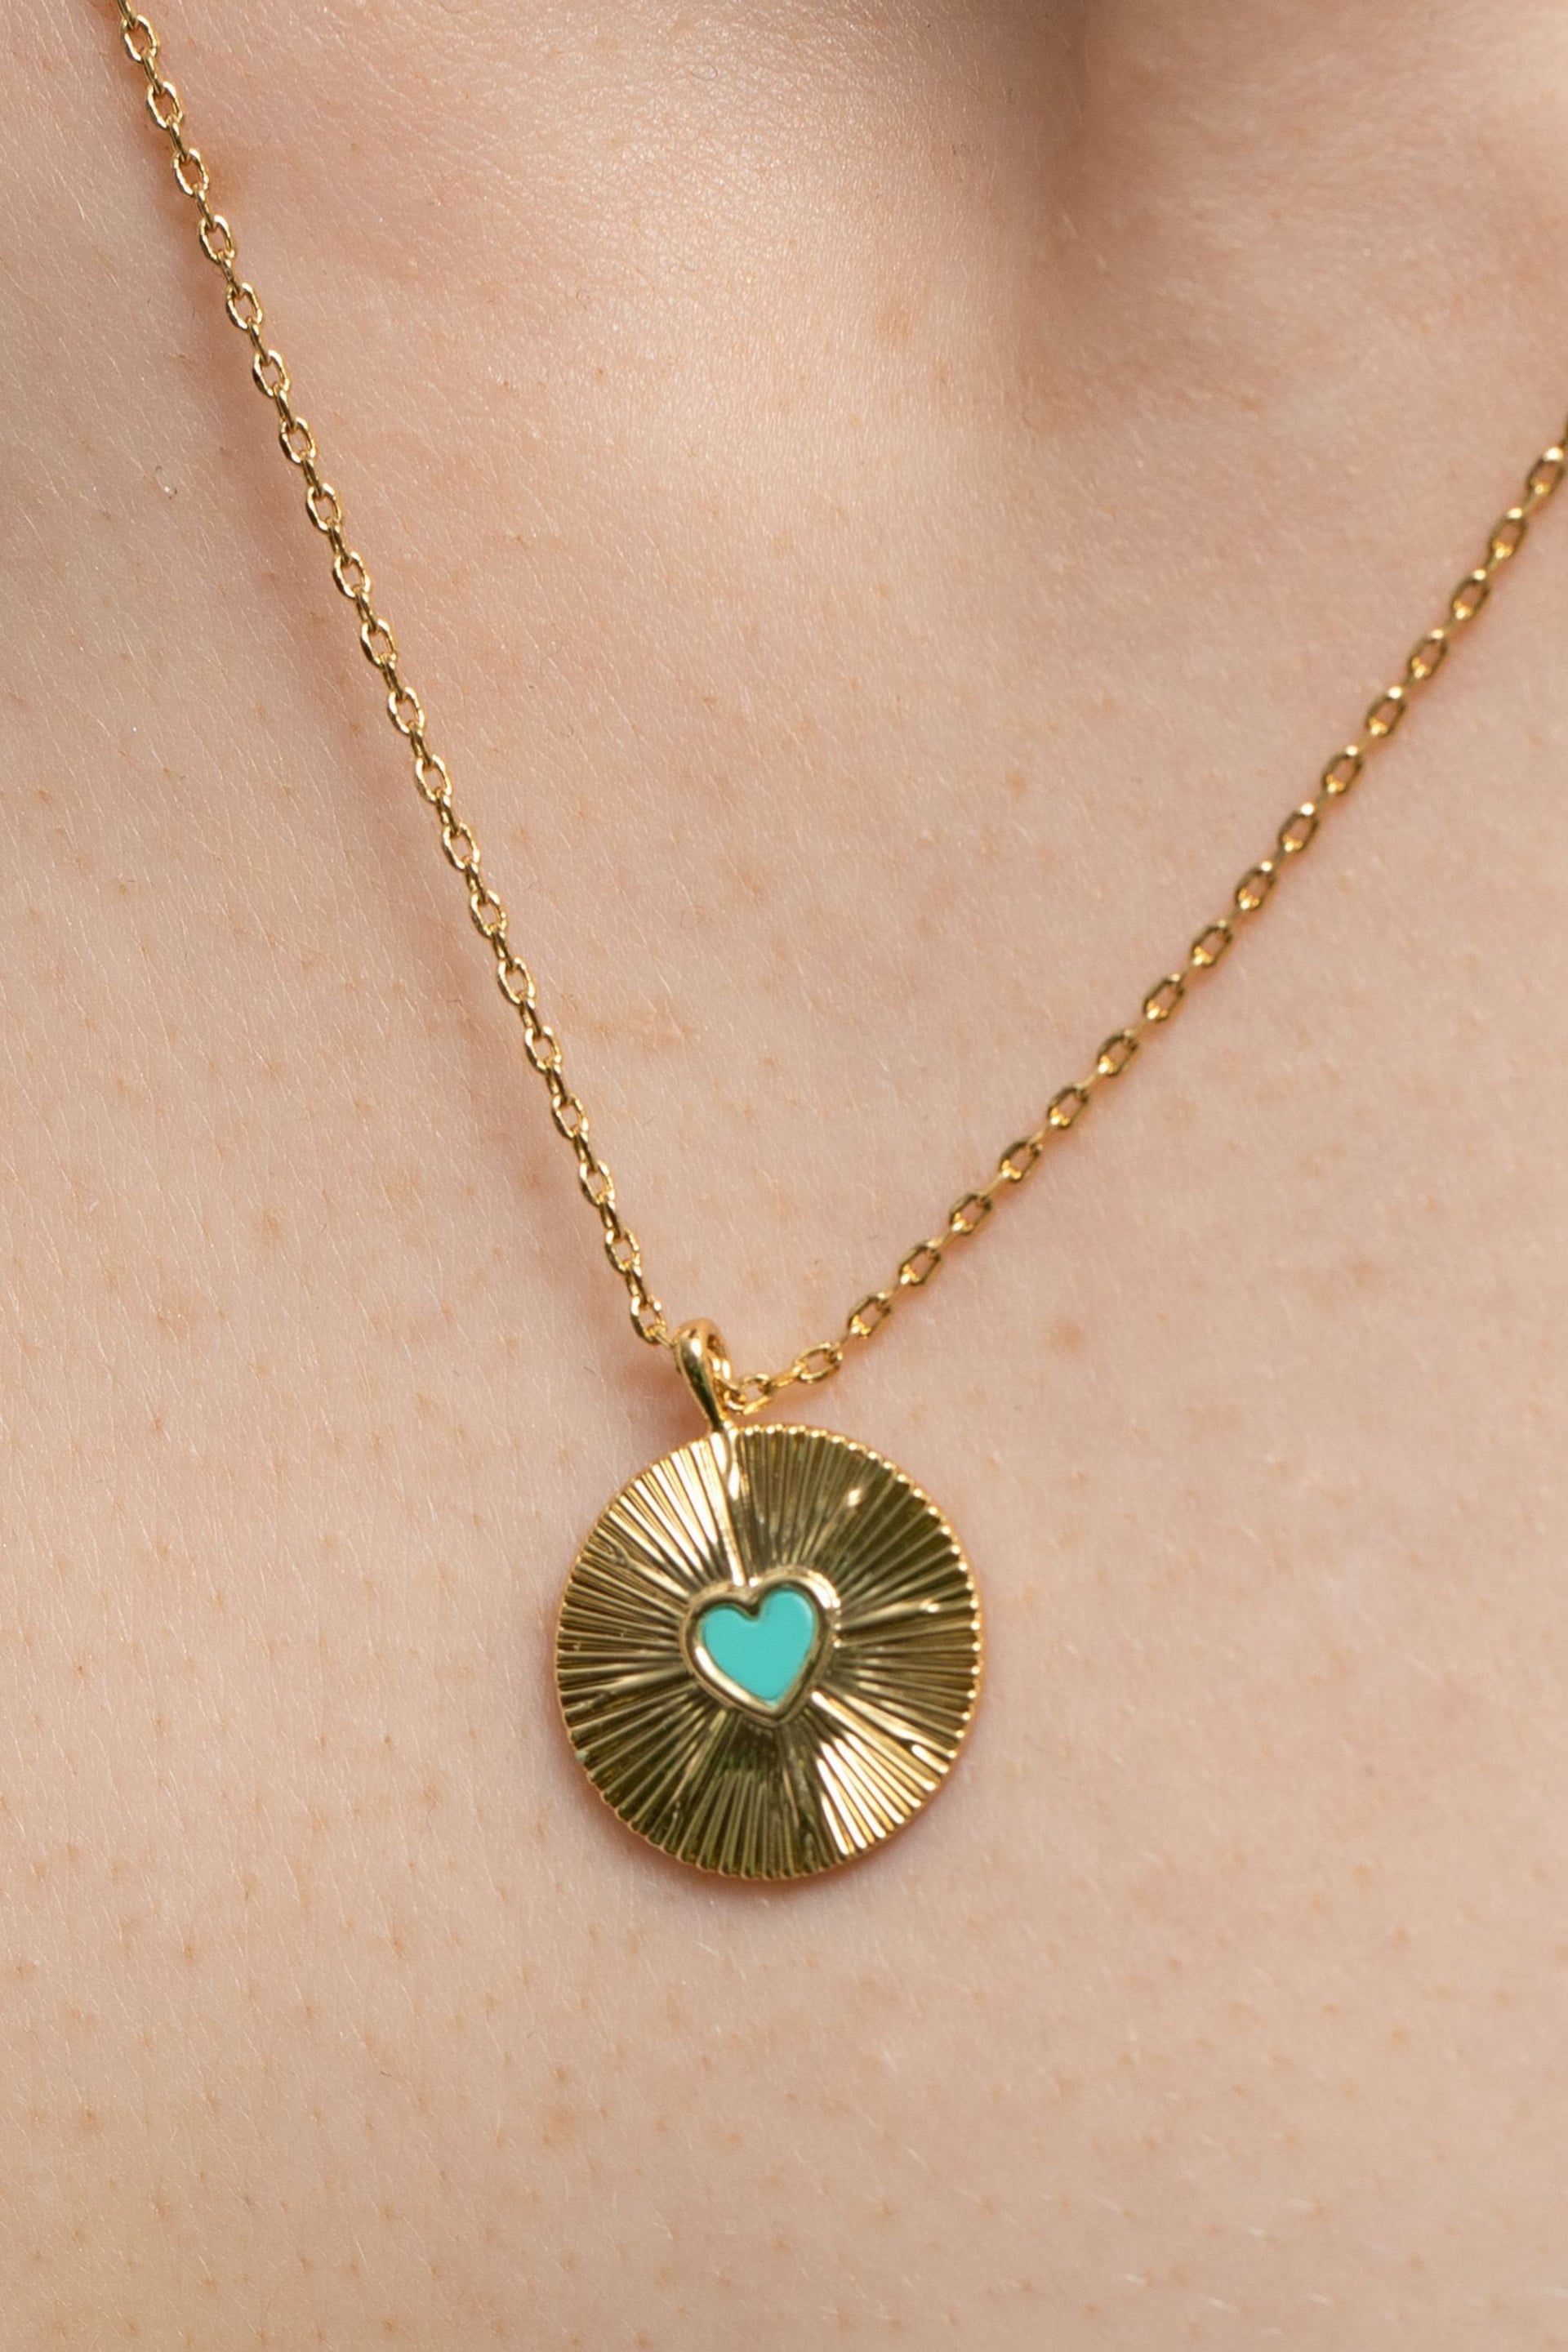 Inicio Gold Plated Heart Pendant Necklace - Image 2 of 2